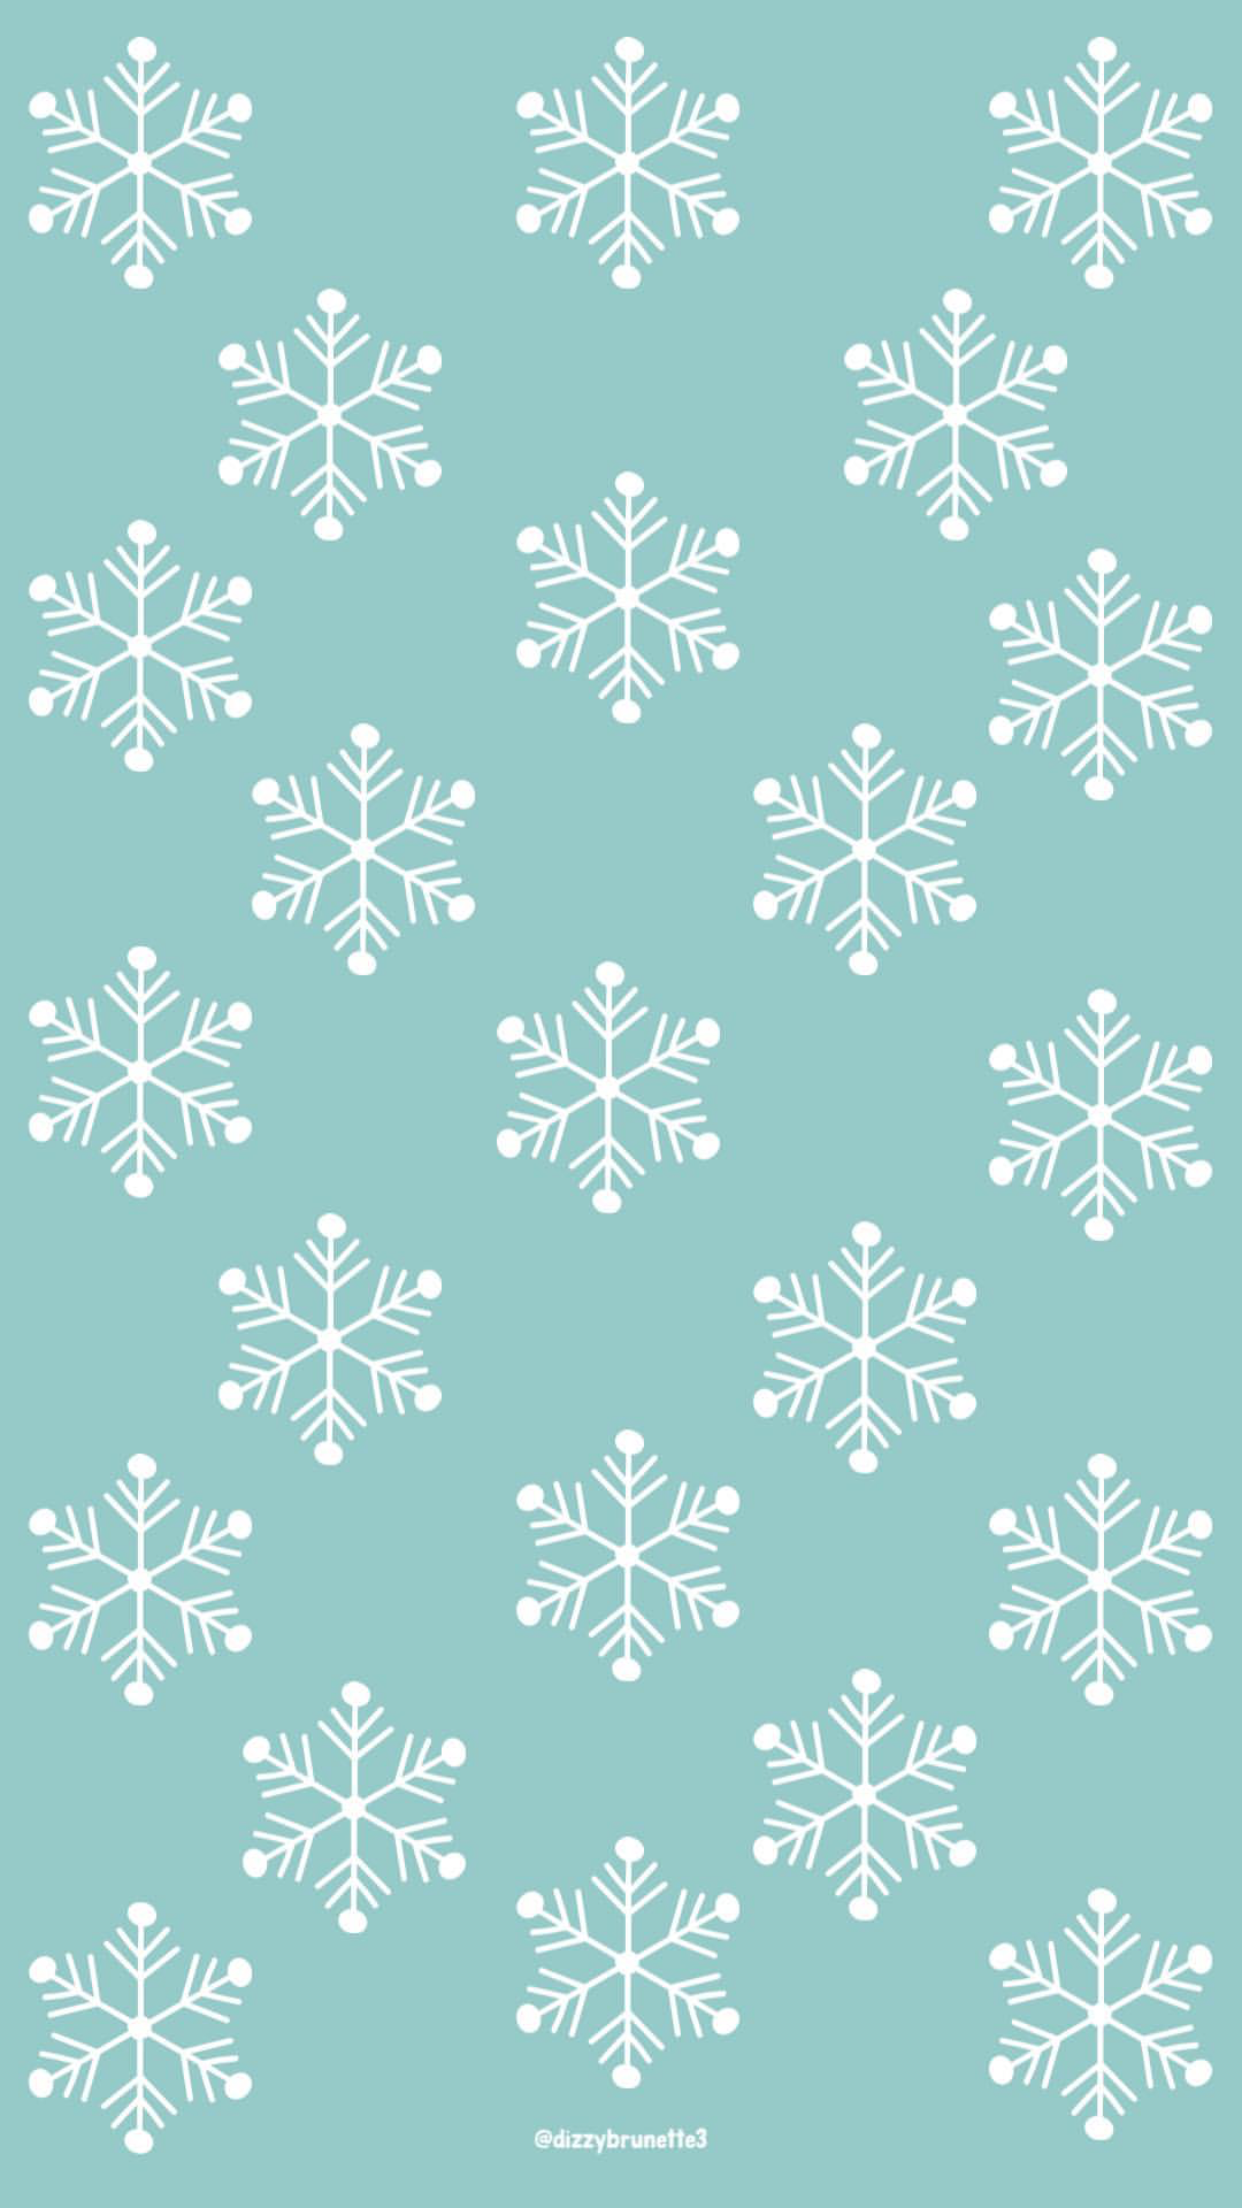 CHRISTMAS IPHONE WALLPAPERS. Wallpaper iphone christmas, Christmas wallpaper, Christmas phone wallpaper